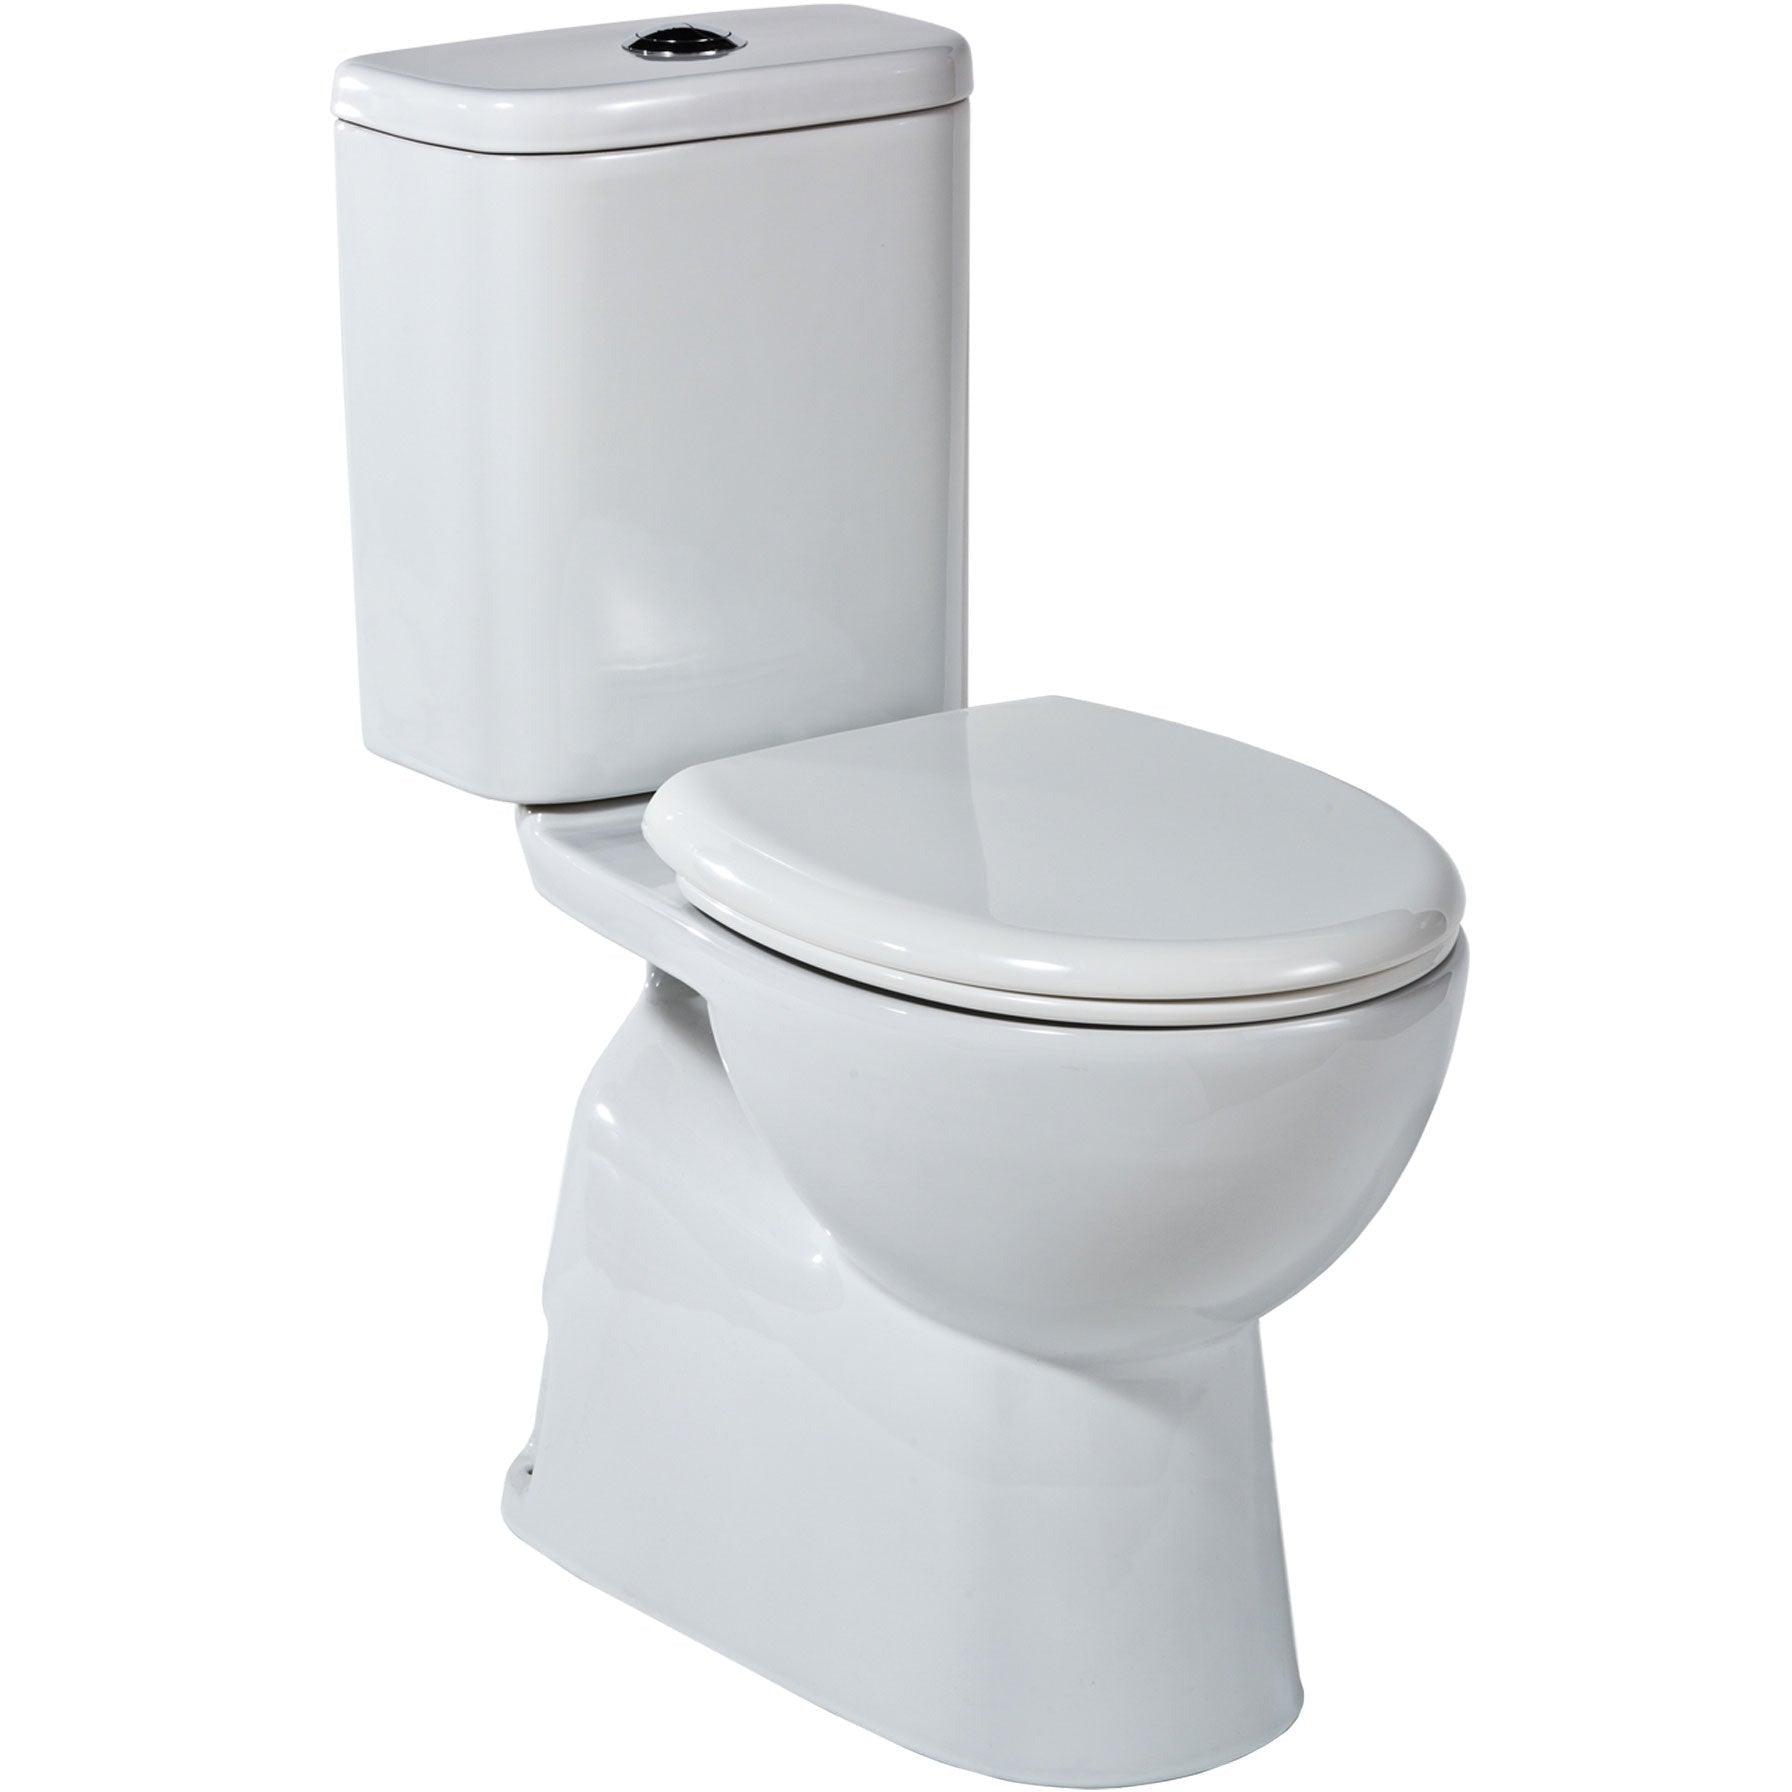 Seima Select Wall Close Coupled Toilet Suite Back Entry - Burdens Plumbing